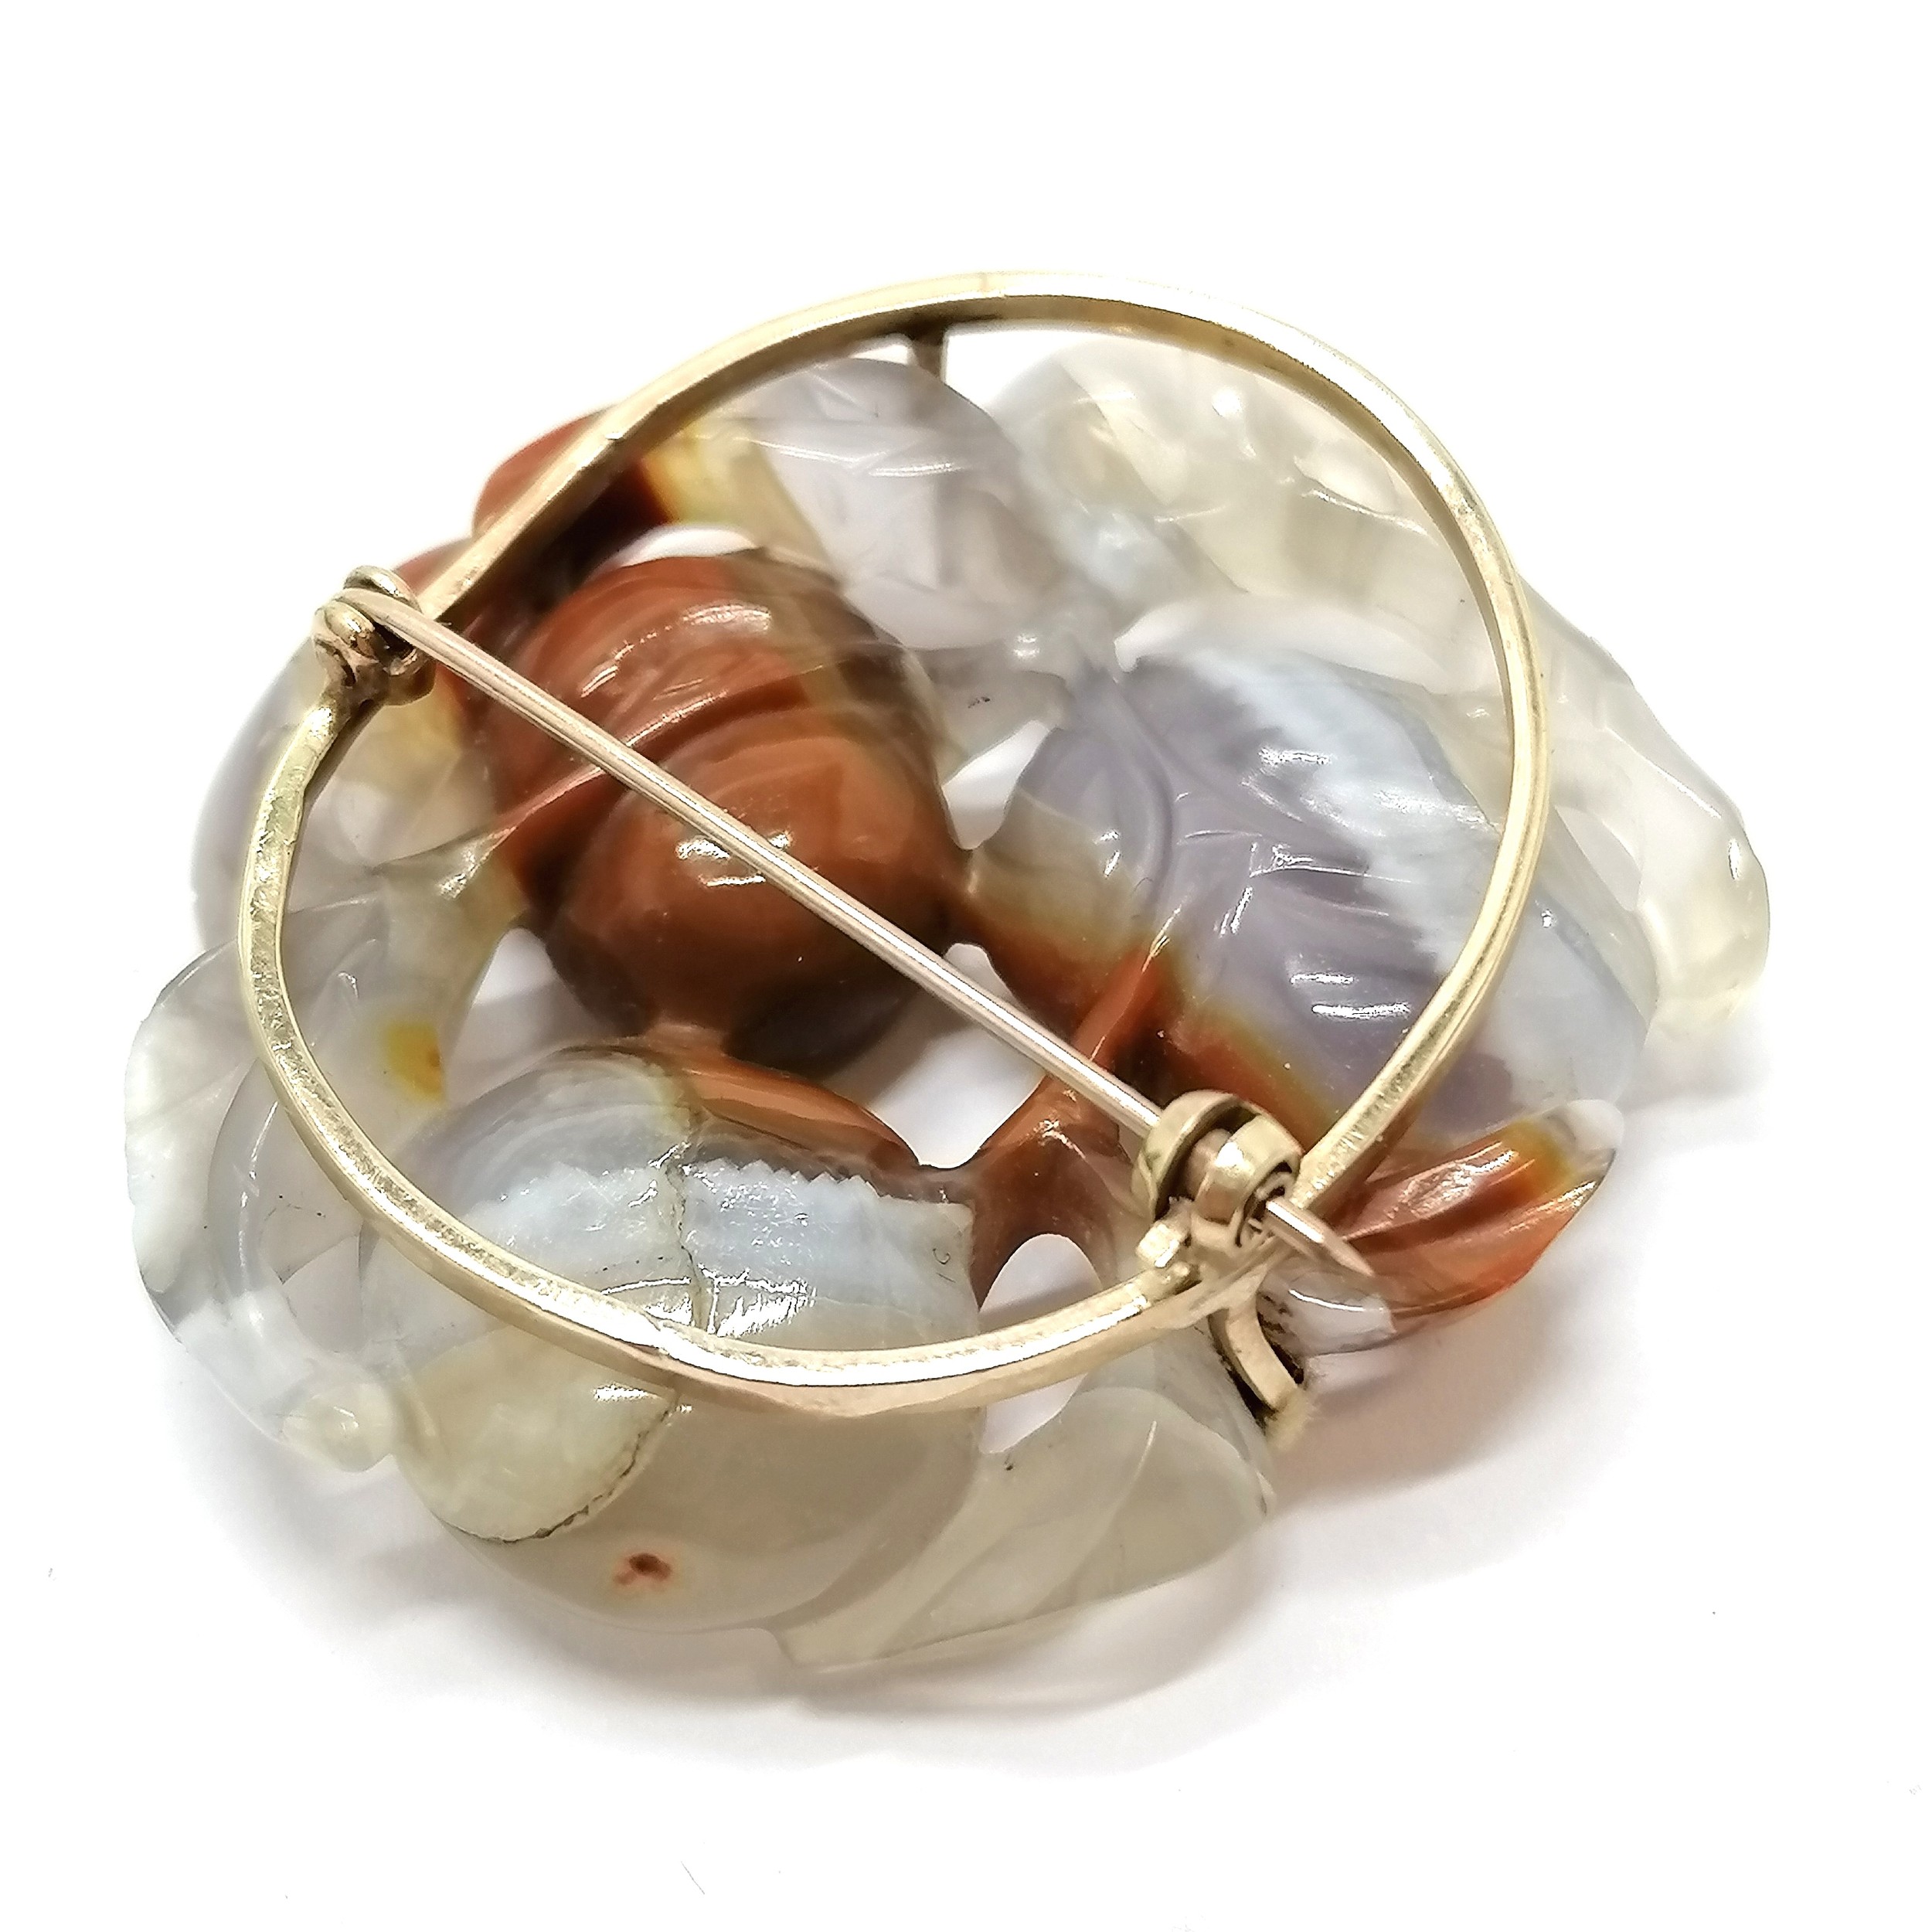 Chinese hand carved agate panel brooch in an unmarked gold mount - 4.8cm across & 21g total weight - Image 2 of 4